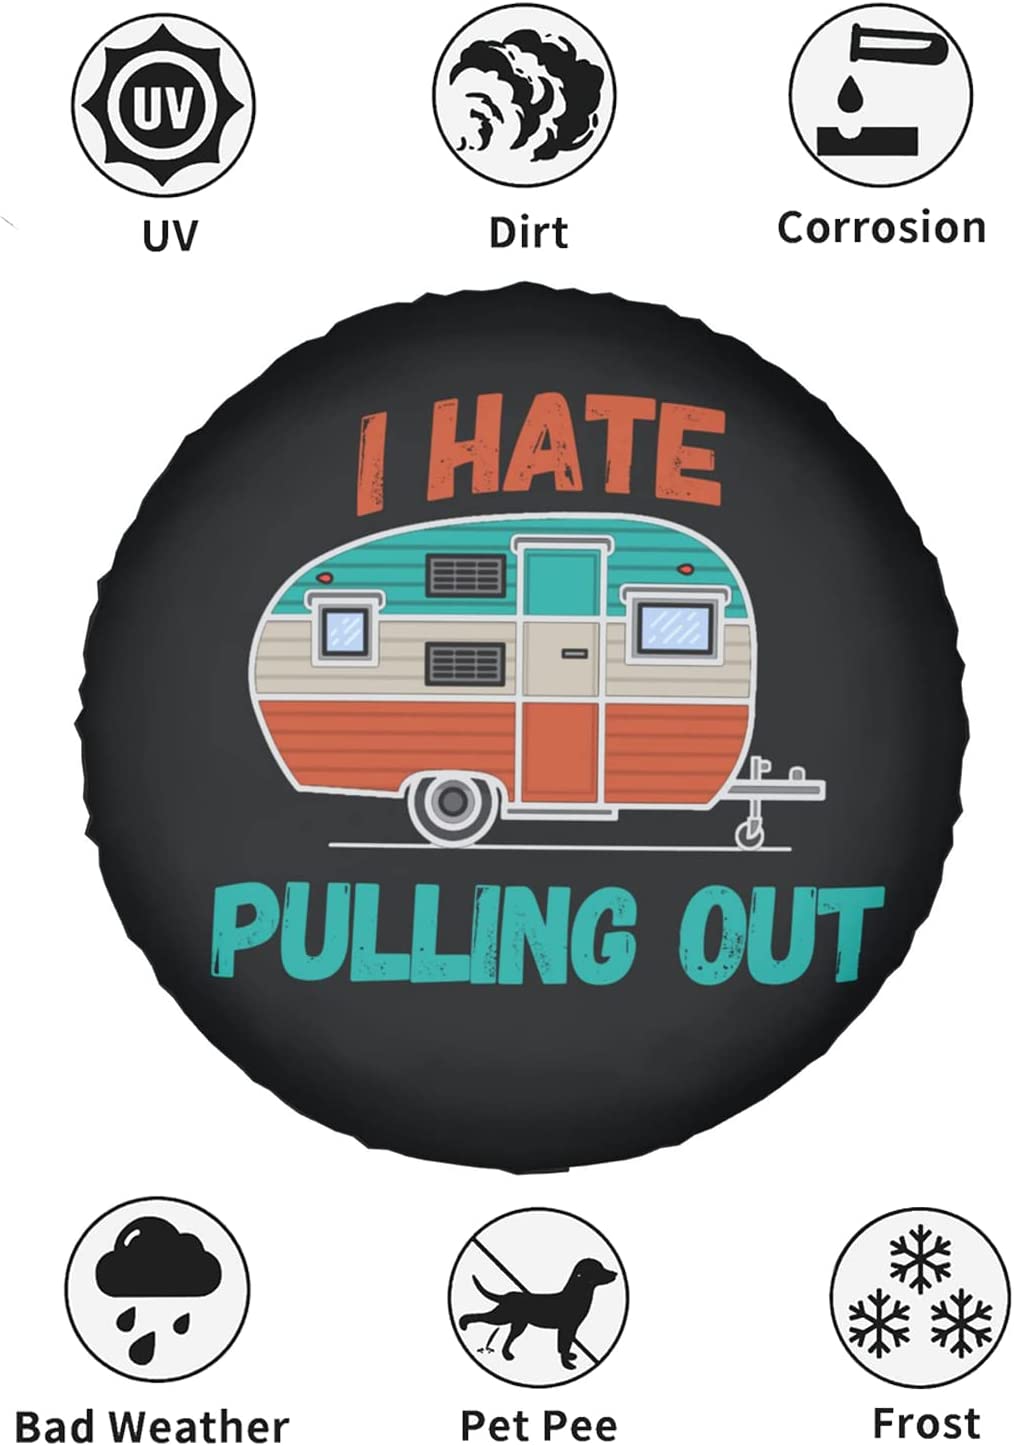 I Hate Pulling Out Spare Tire Cover Wheel Covers for RV Tires Camper Tire Cover Protectors for Trailer Rv SUV Truck Travel Trailer - 2